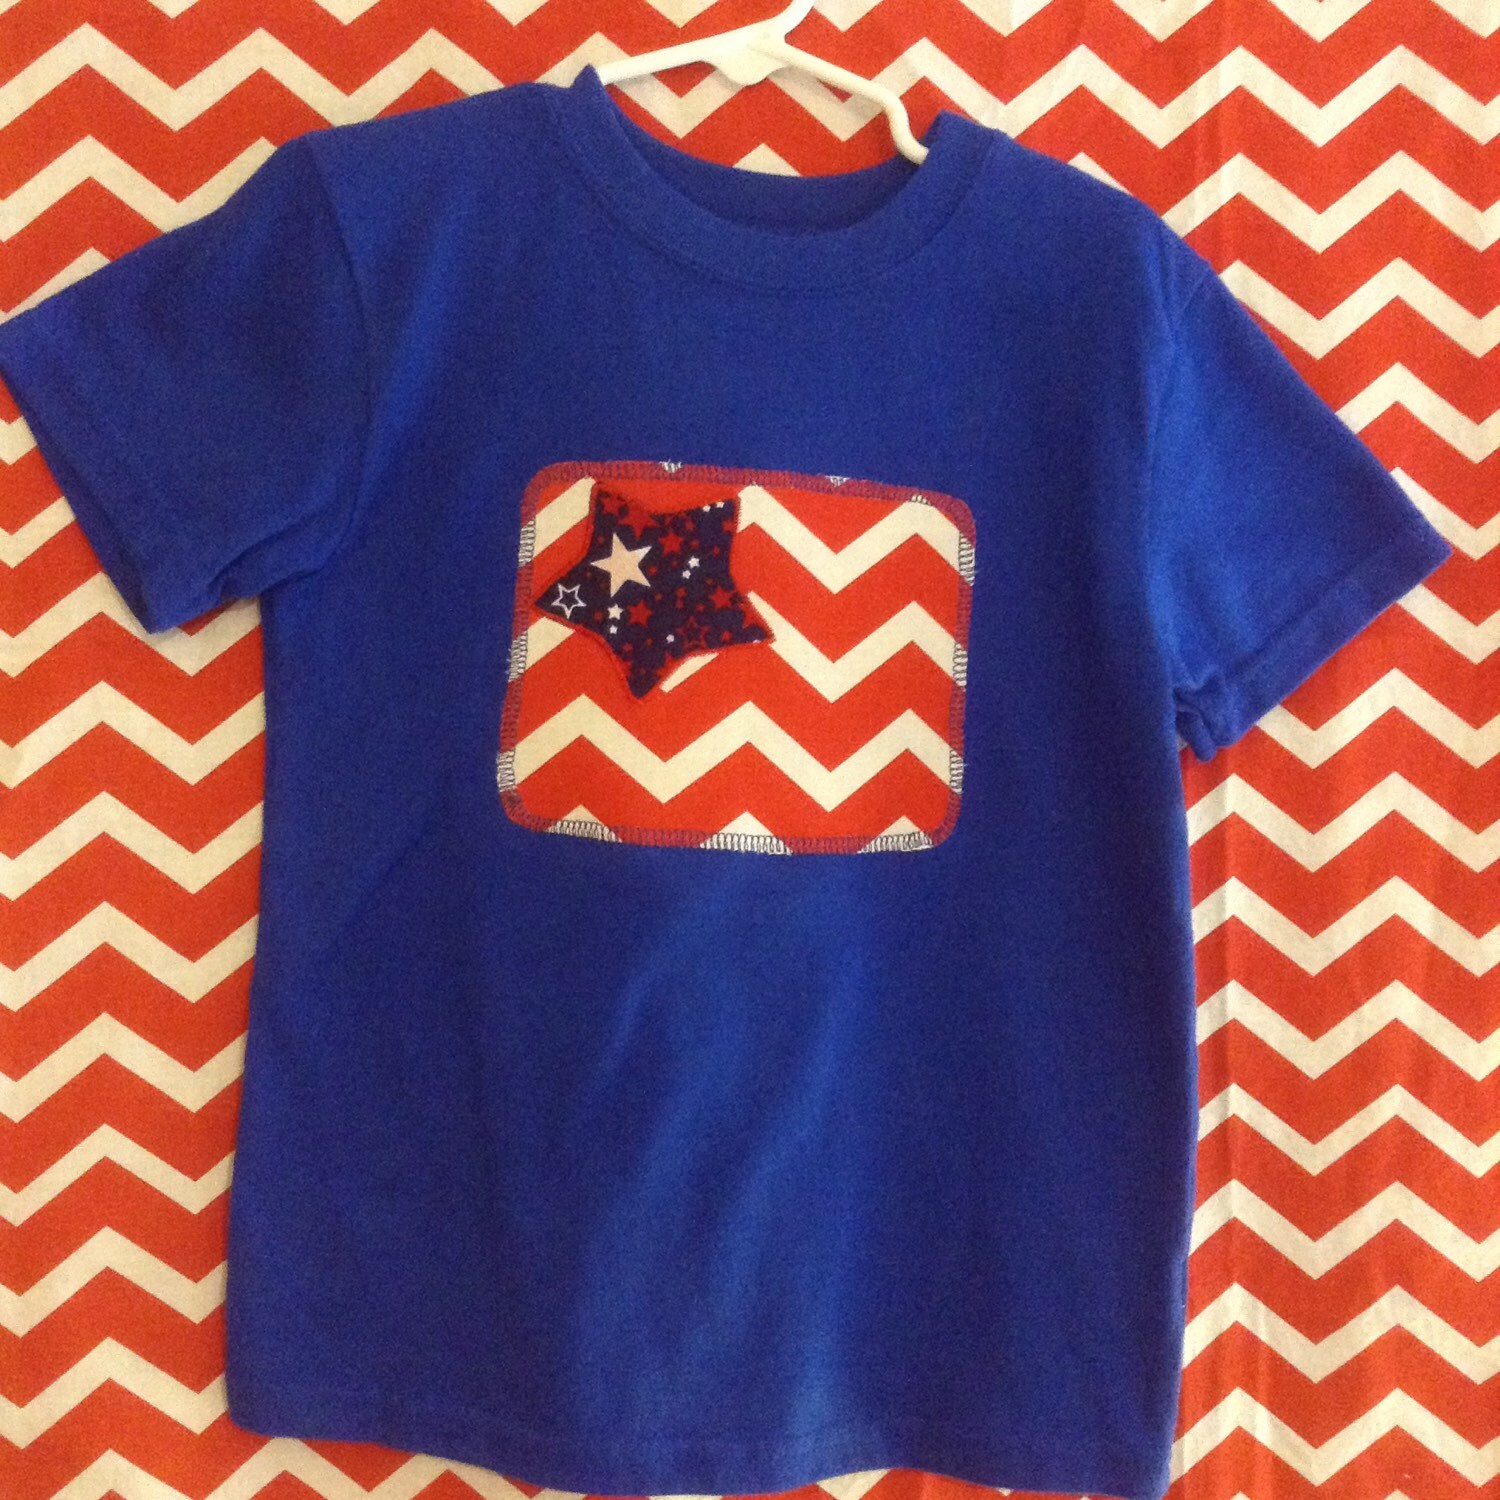 Toddler boys USA flag t-shirt by DaisyJaneApplique on Etsy